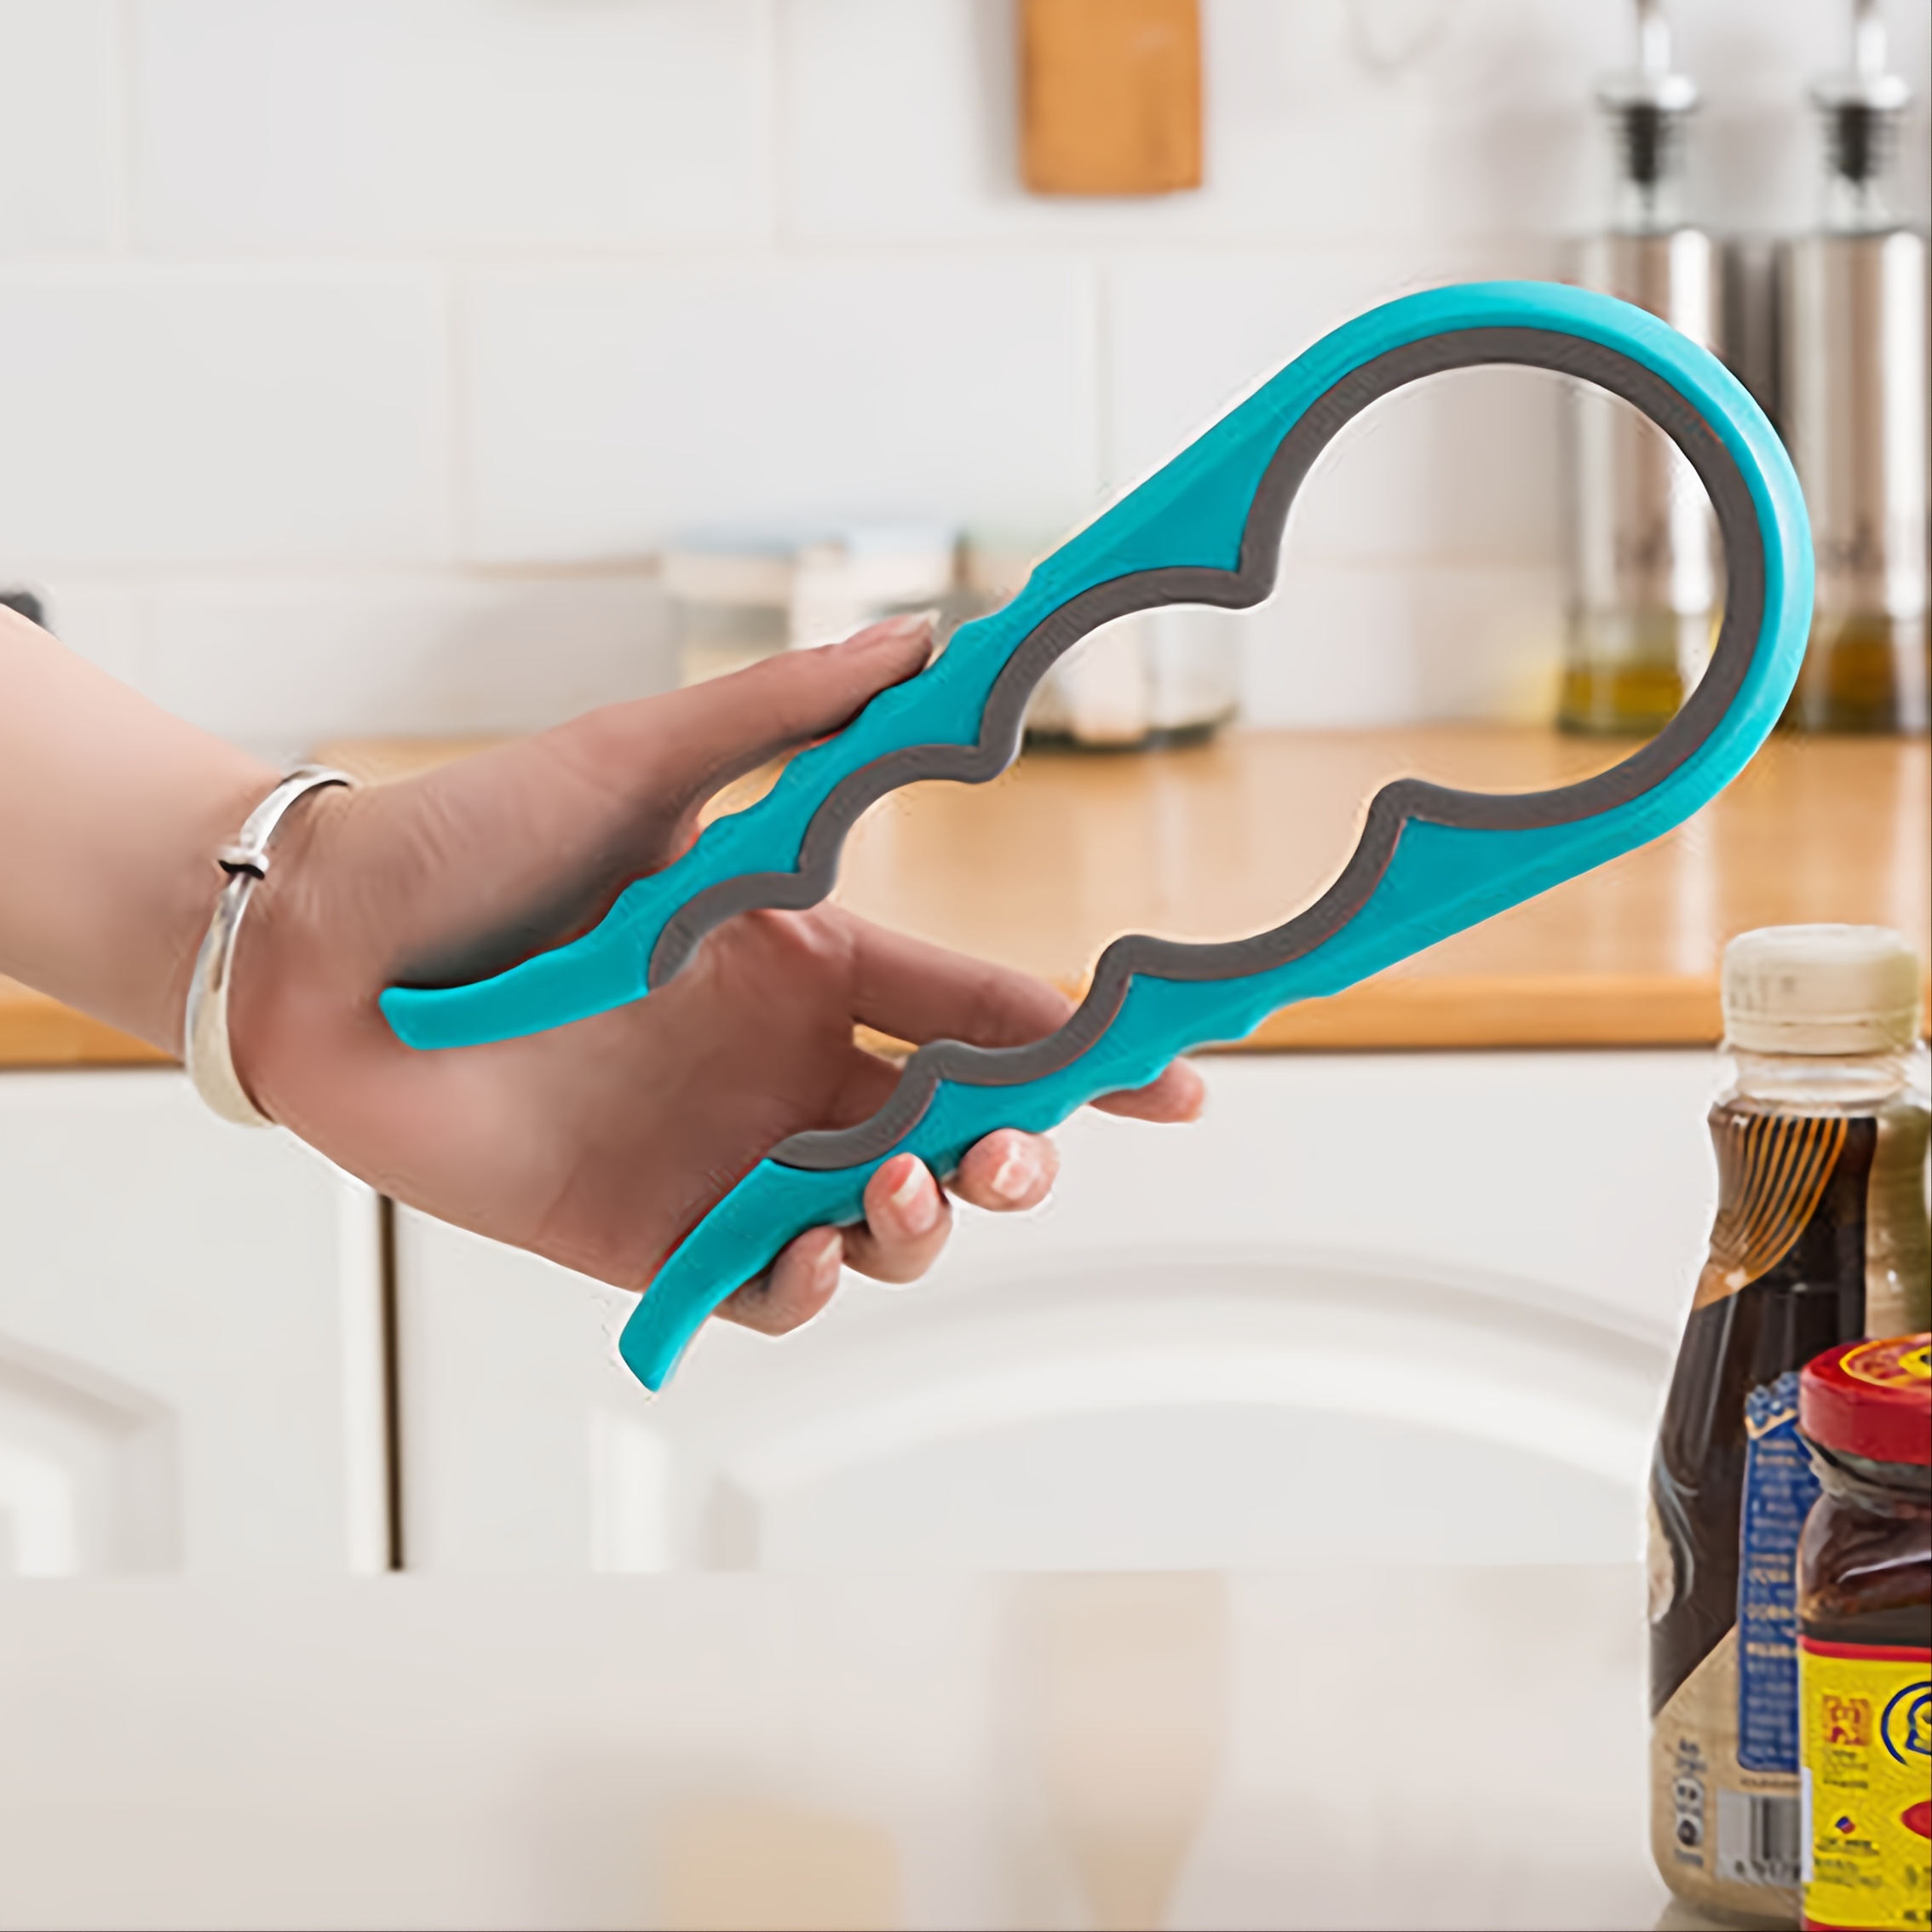 Shop for Multifunction 3 in 1 Bottle Caps Opener Silicone Beer